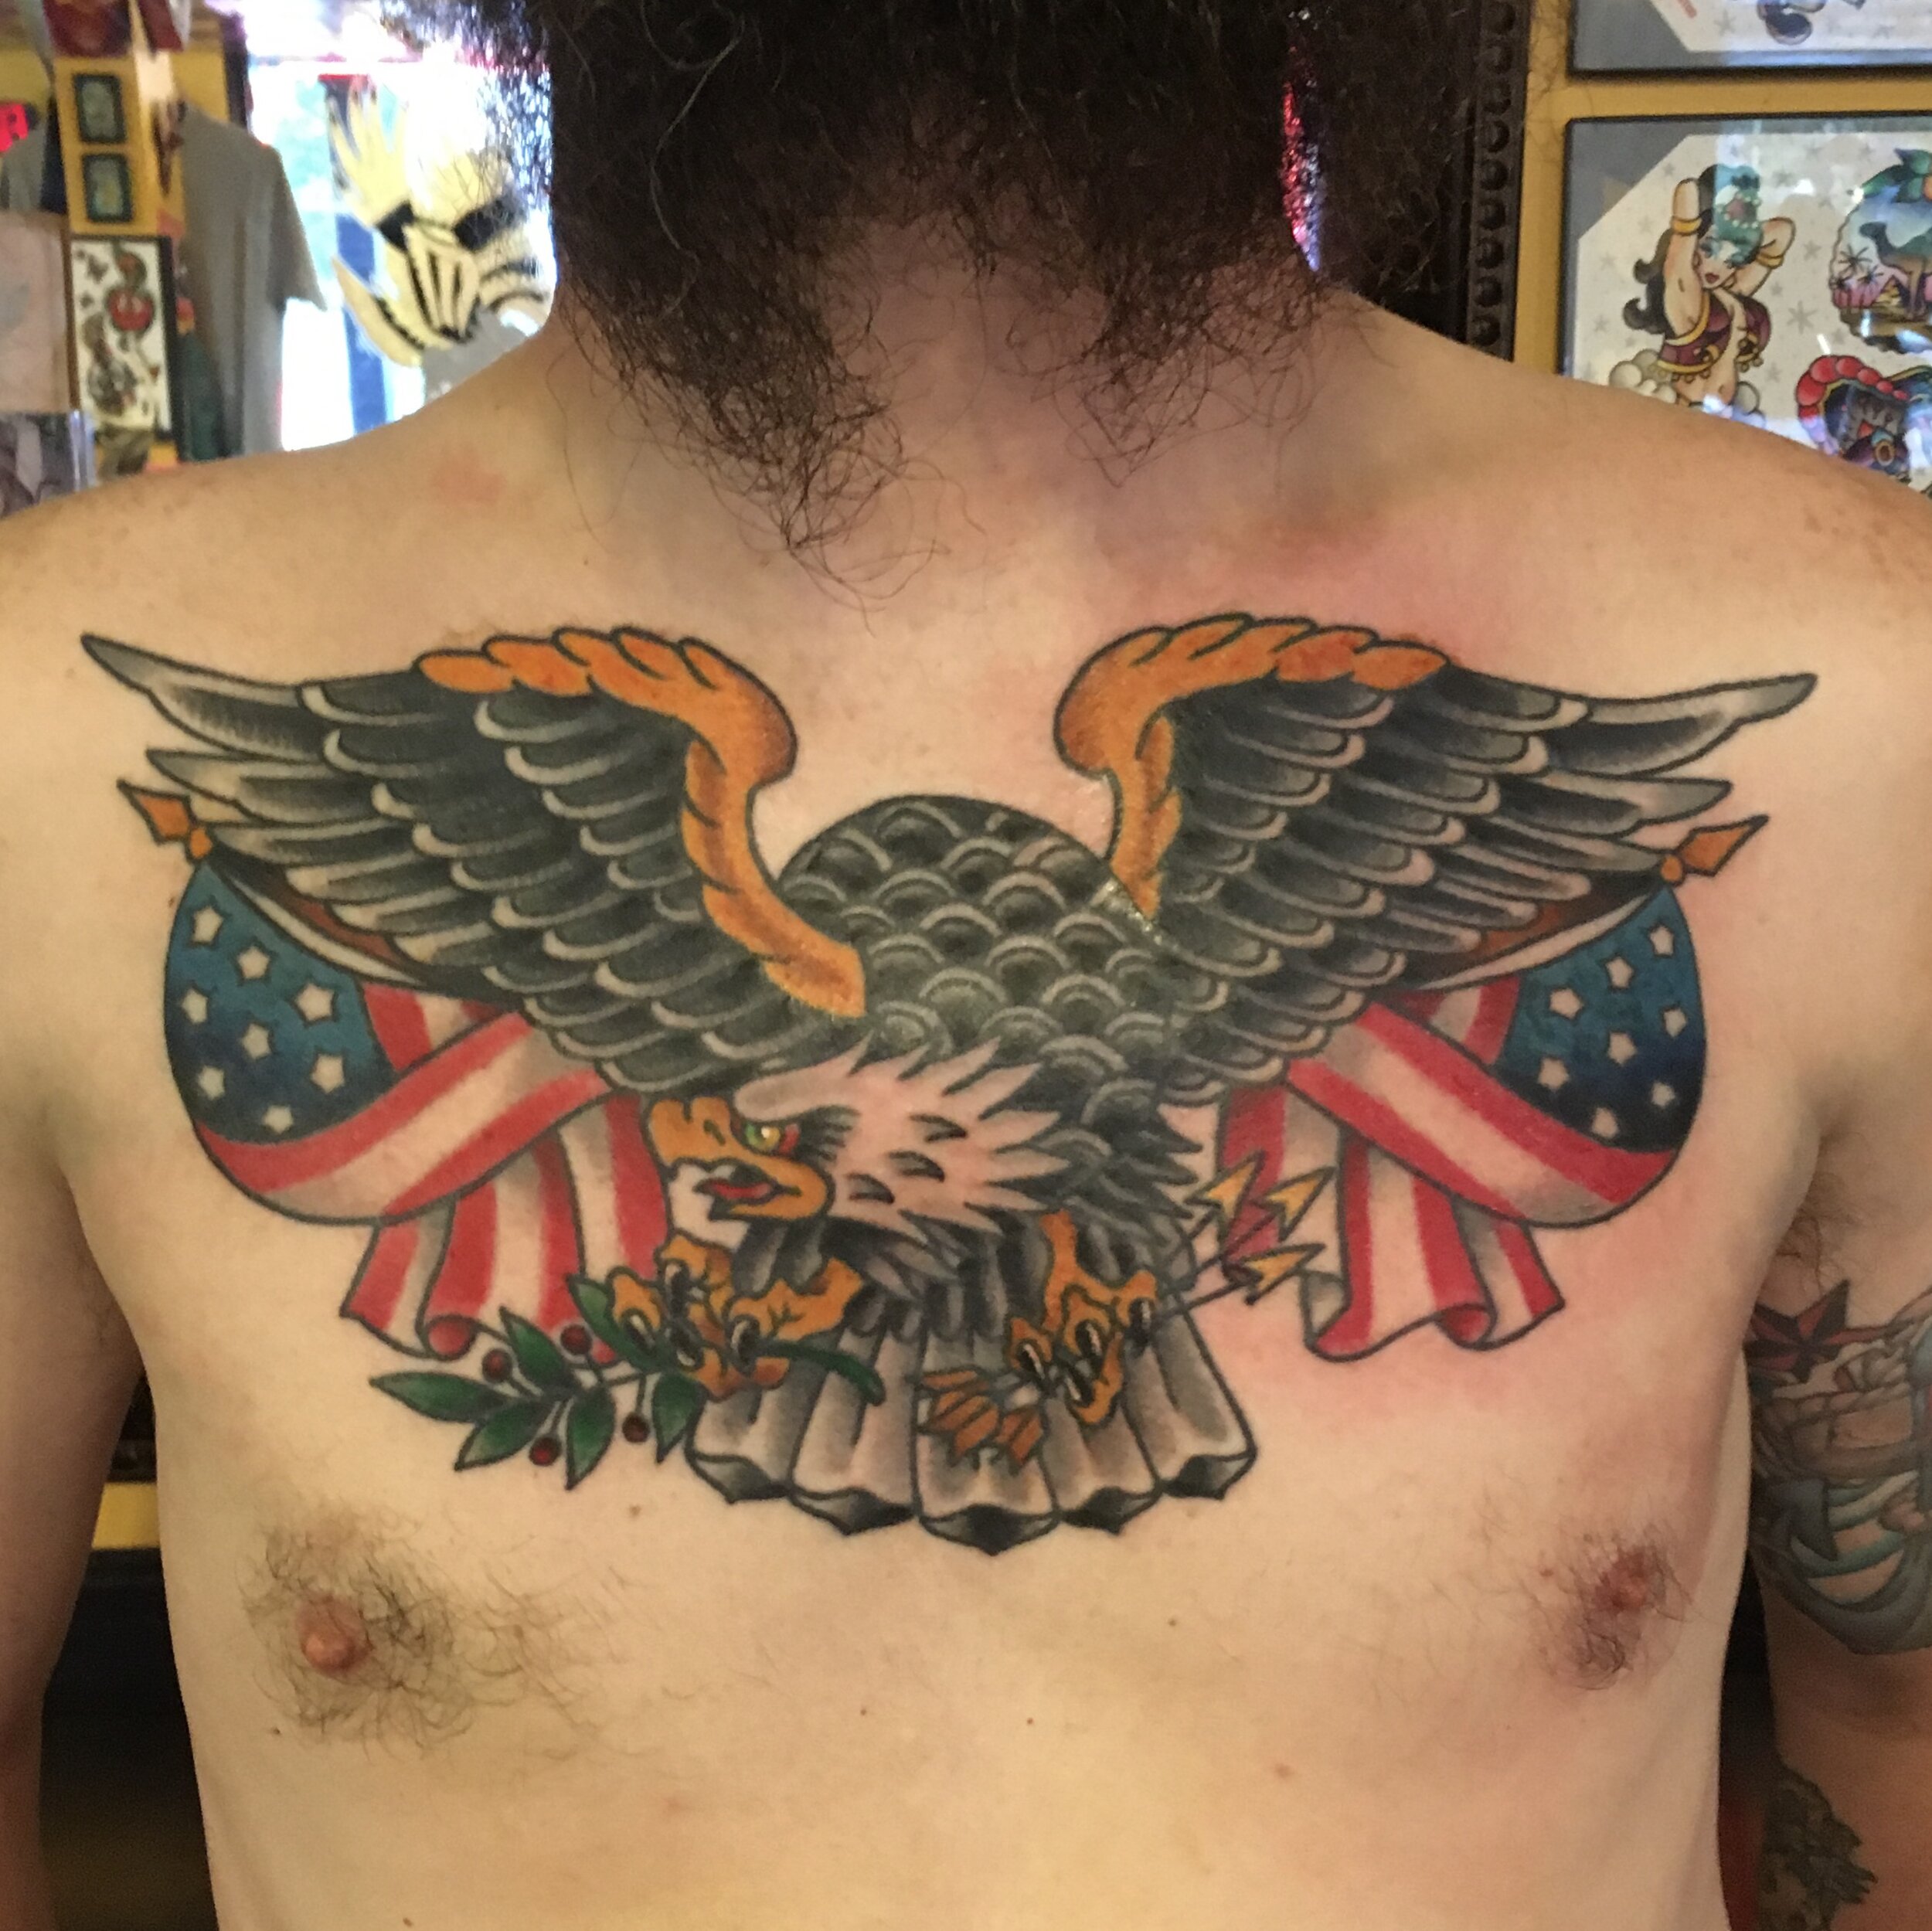 Americana eagle tattoo with American flag on chest by Josh Hanes at Southern Star Tattoo in Atlanta, Georgia